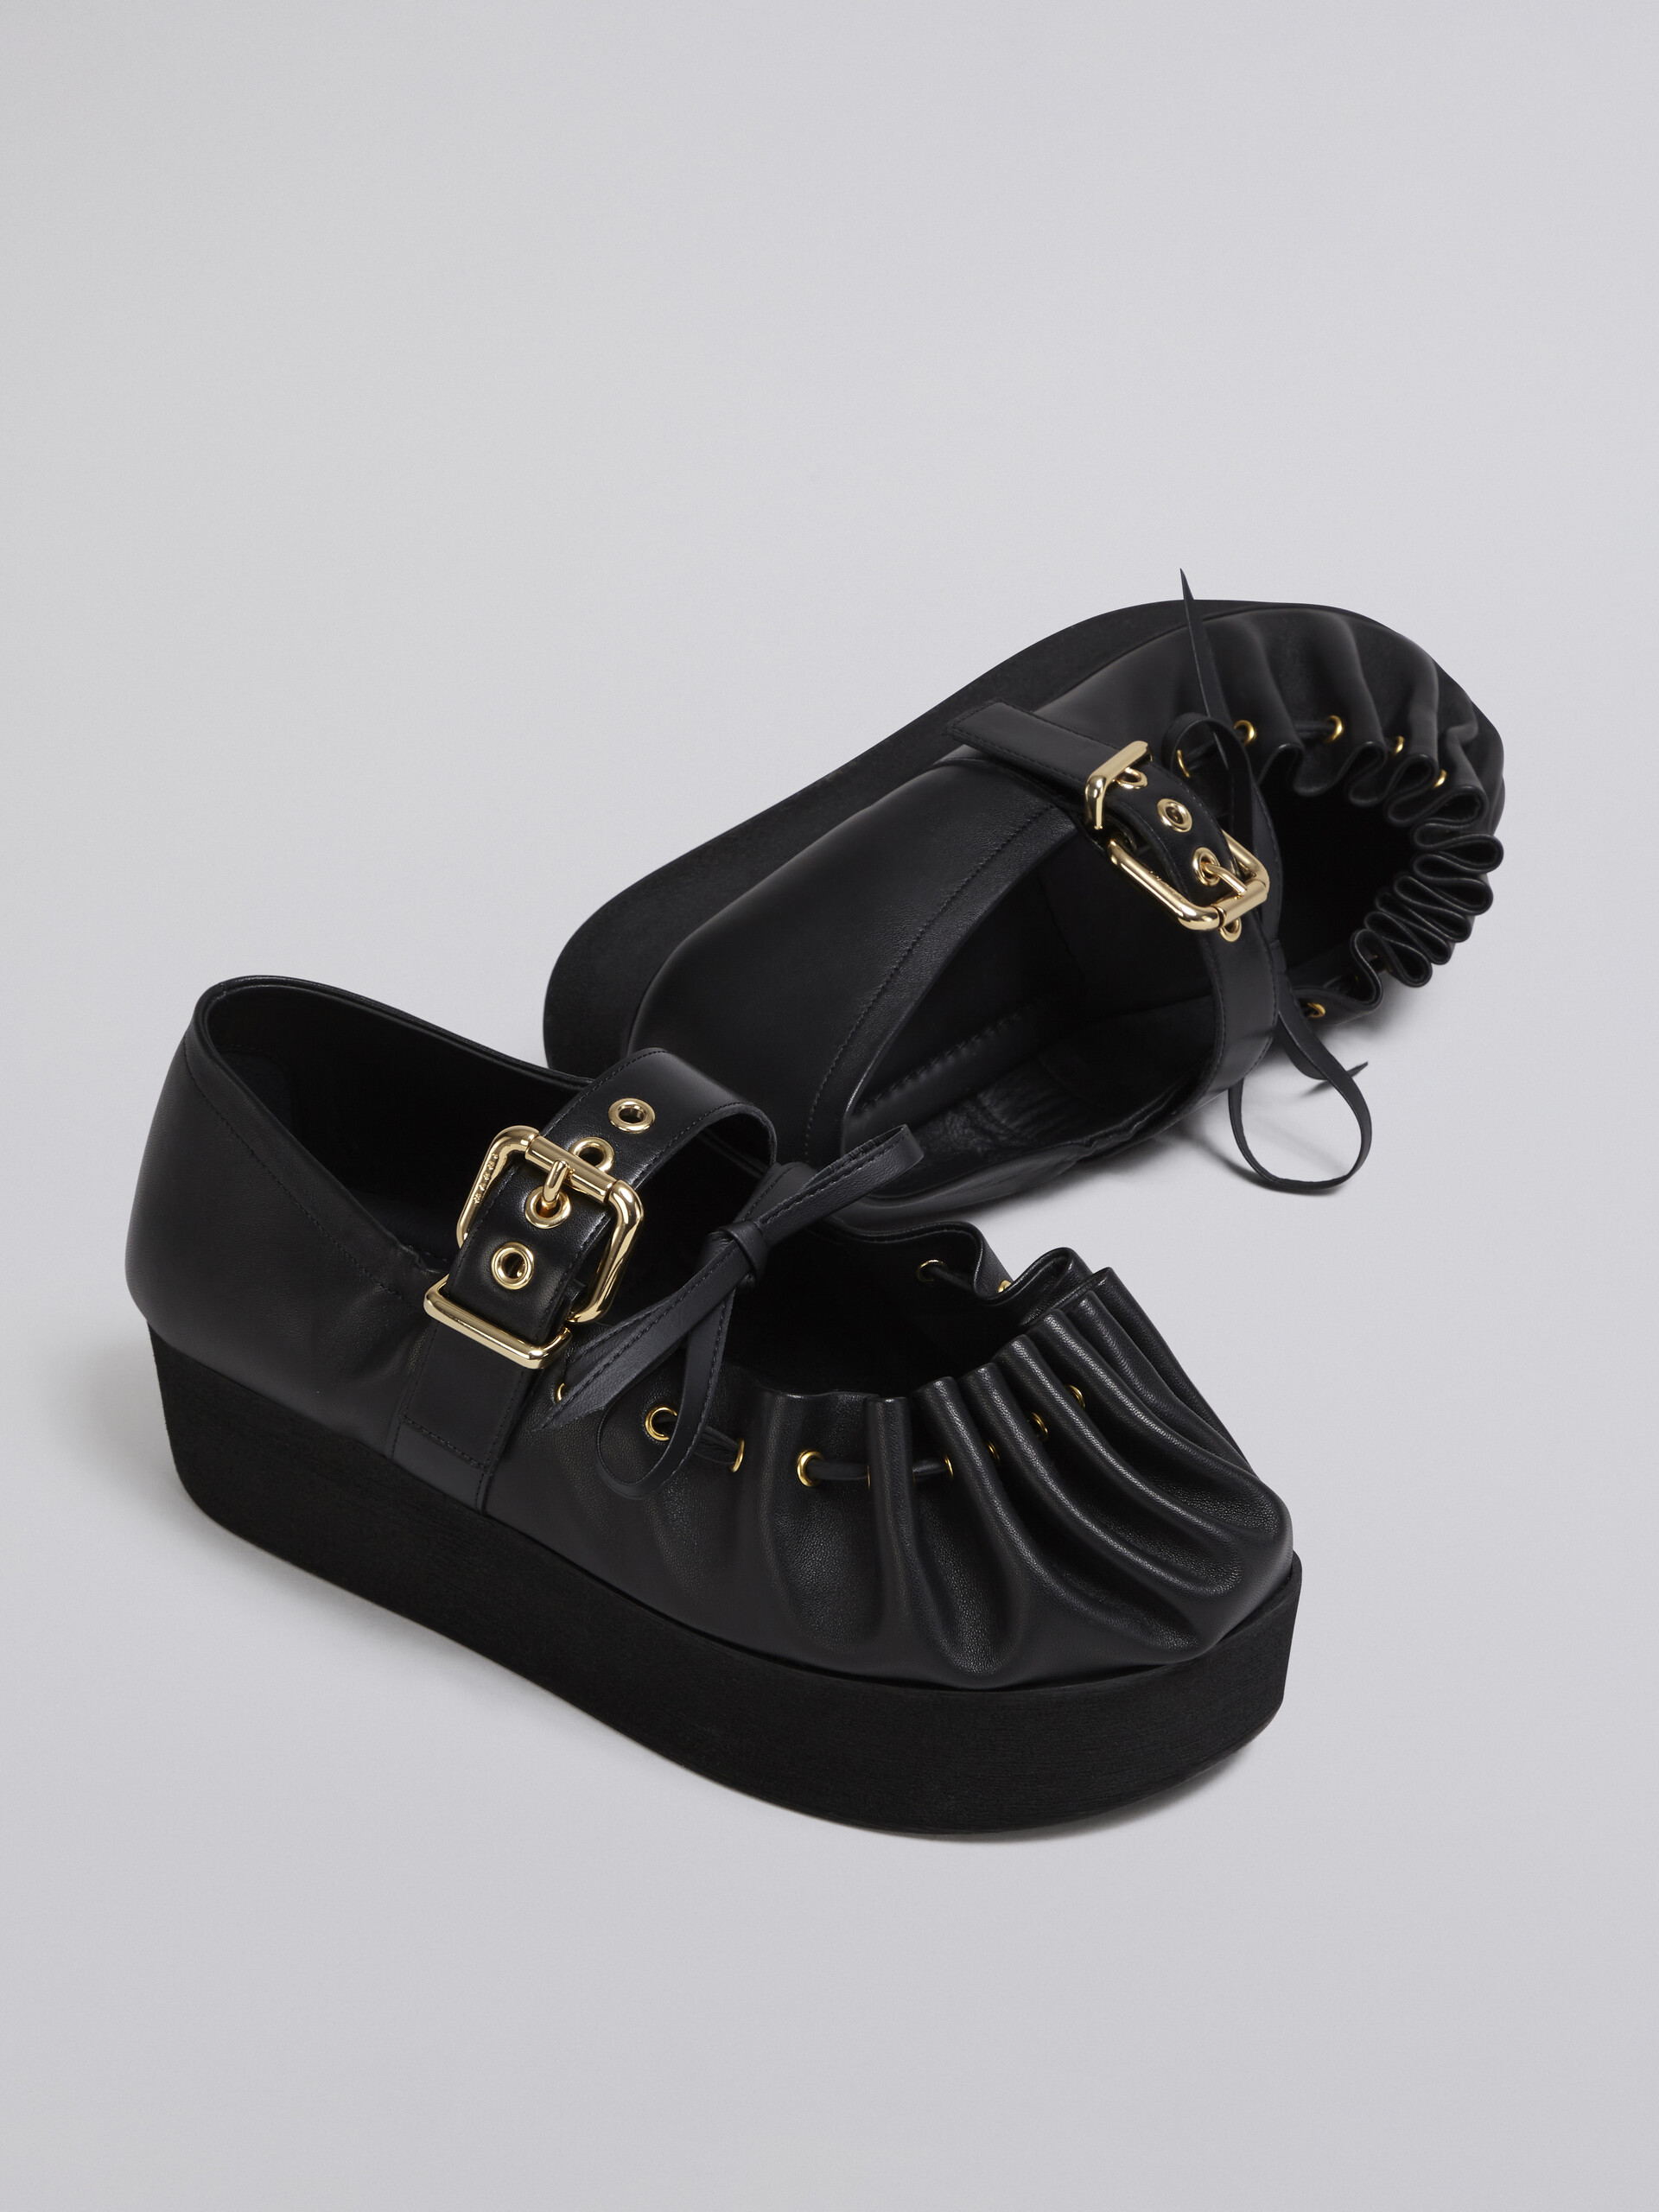 Nappa leather ballerina with rouched rounded captoe - Sandals - Image 5